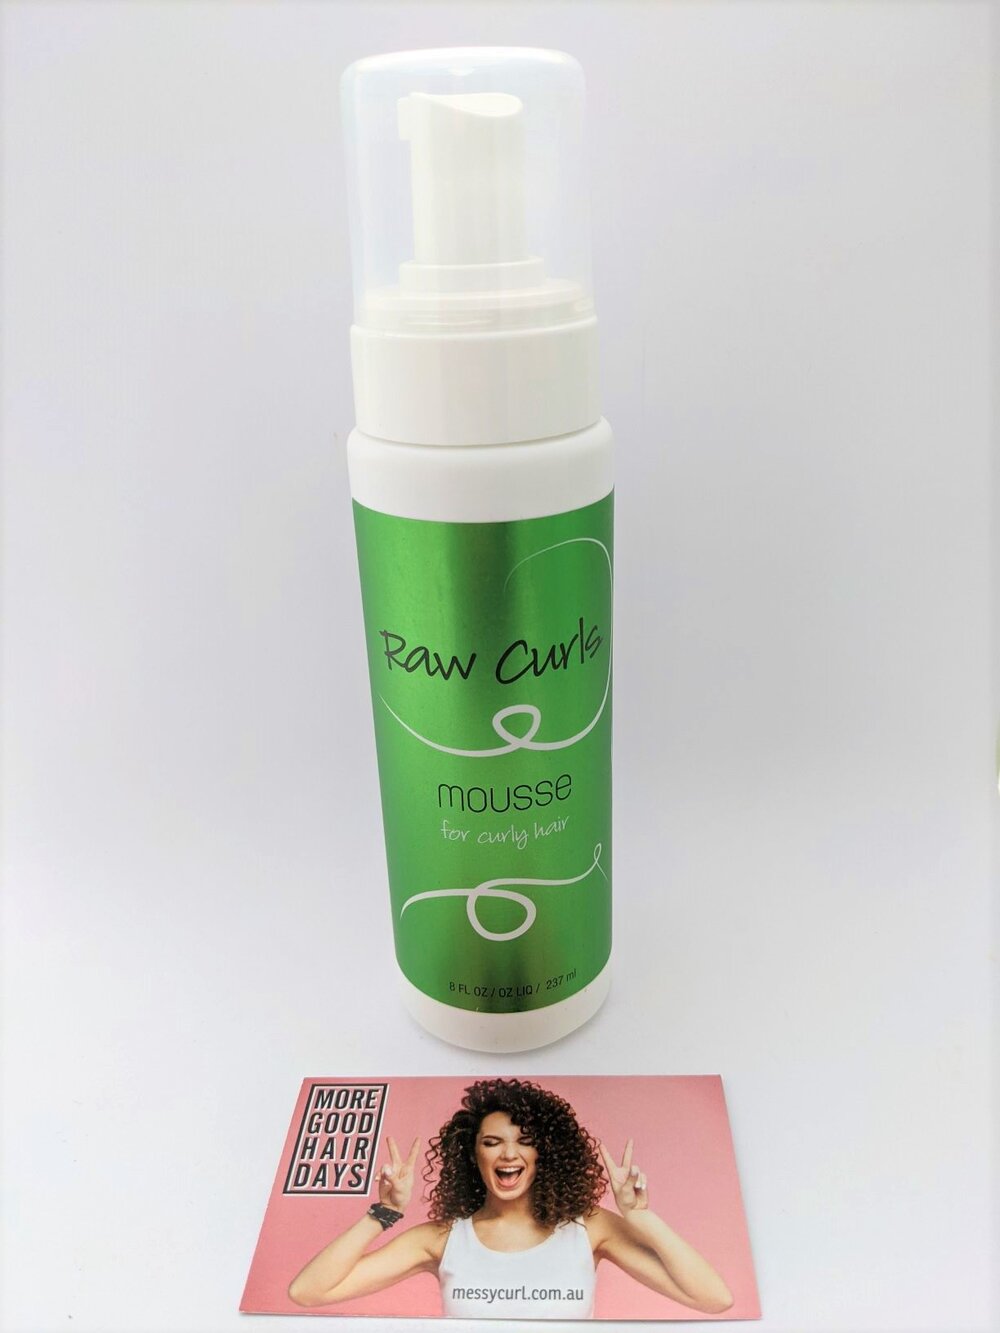 Raw Curls Australia Organic Mousse Styling Foam for Curly Hair — Messycurl  #1 for Jessicurl in Australia